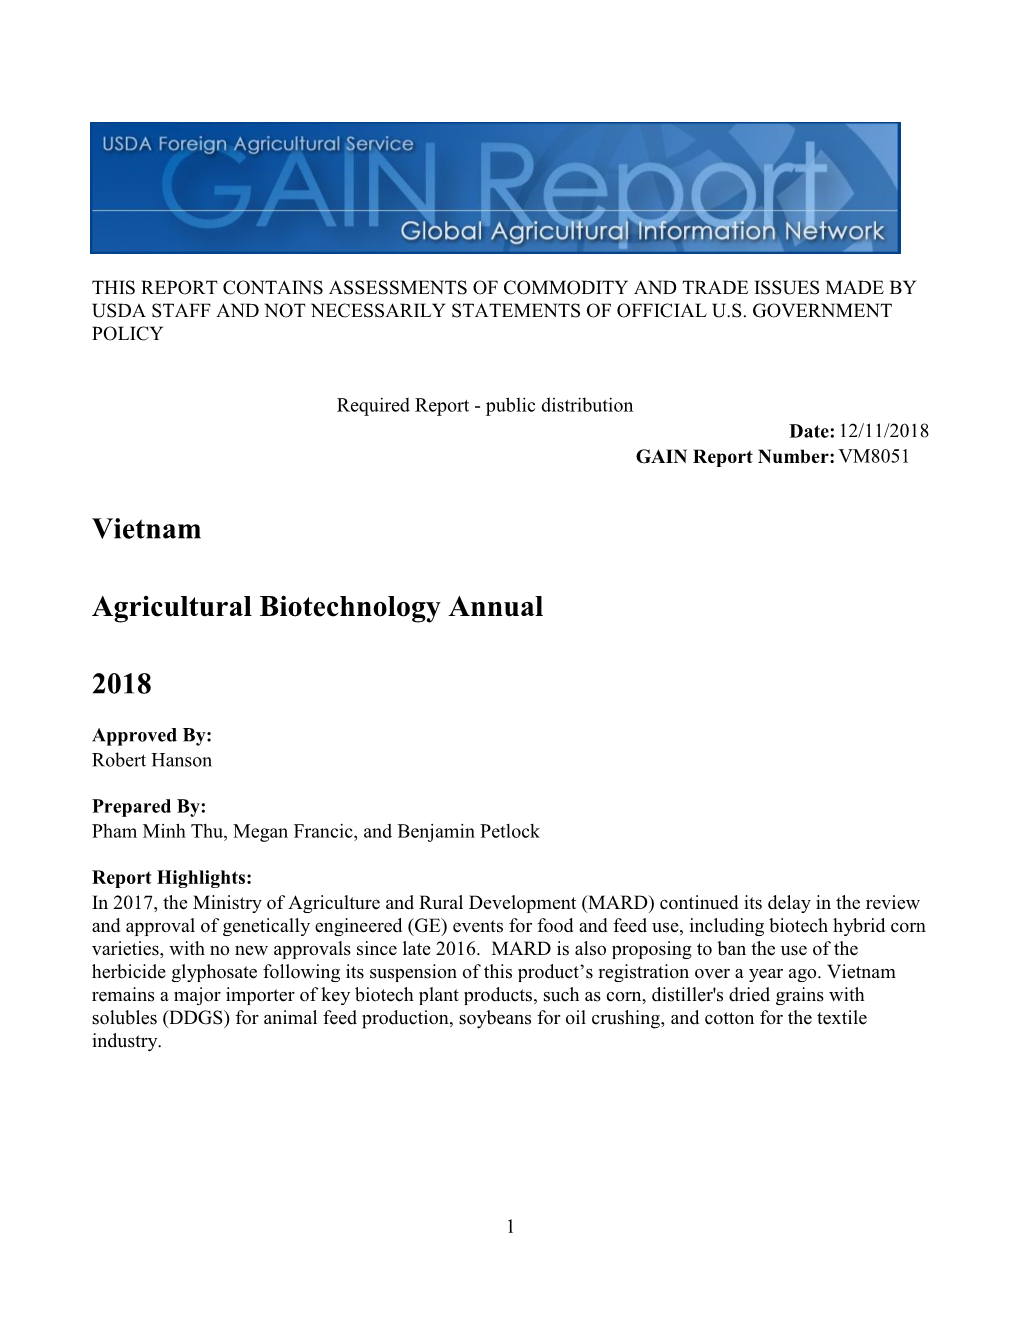 Vietnam Agricultural Biotechnology Annual 2018